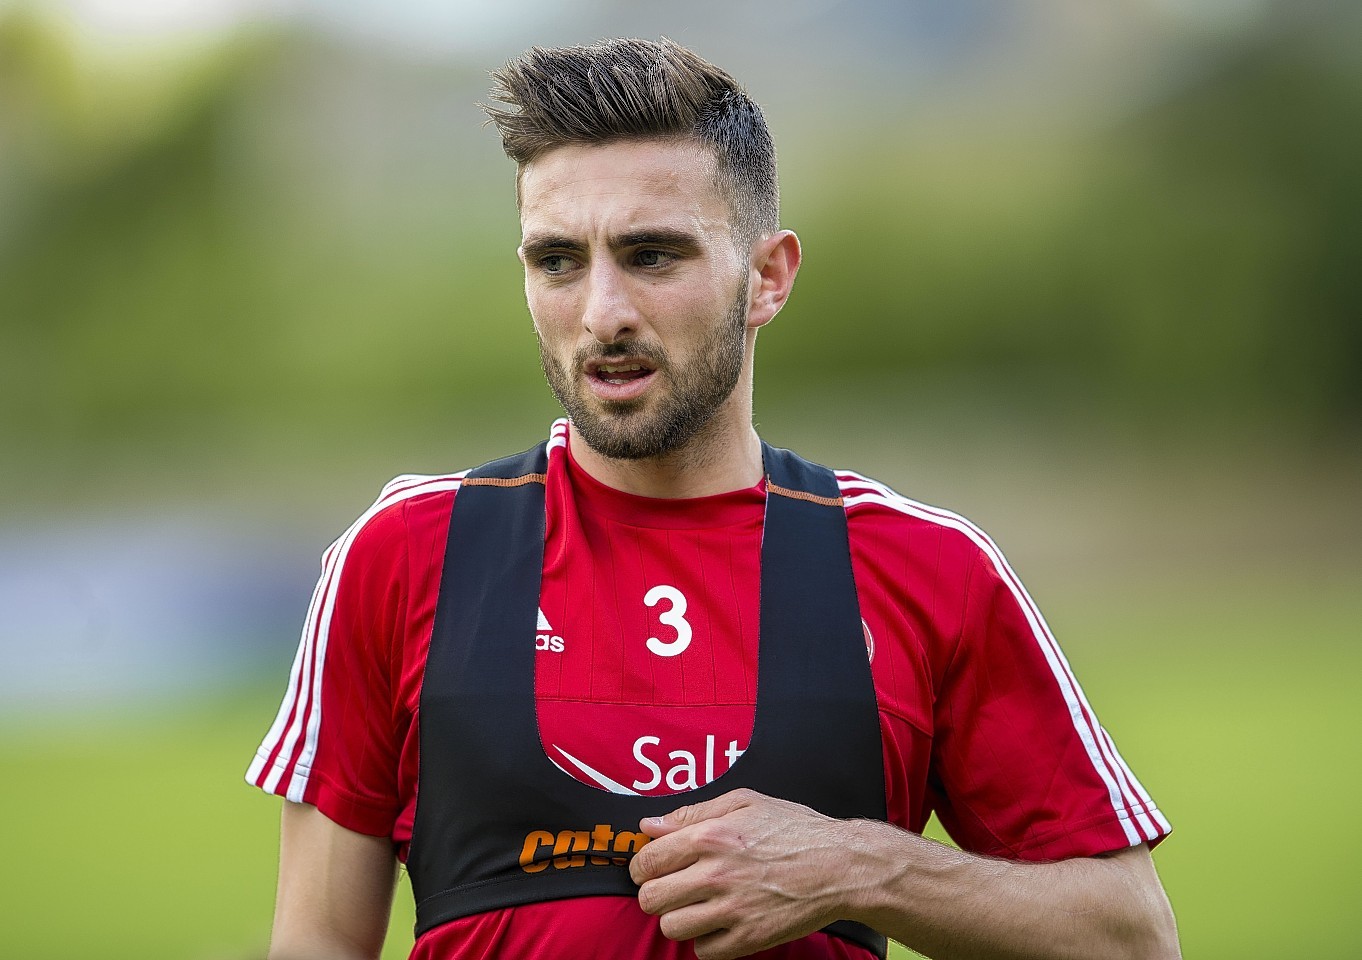 Graeme Shinnie has impressed for the Dons